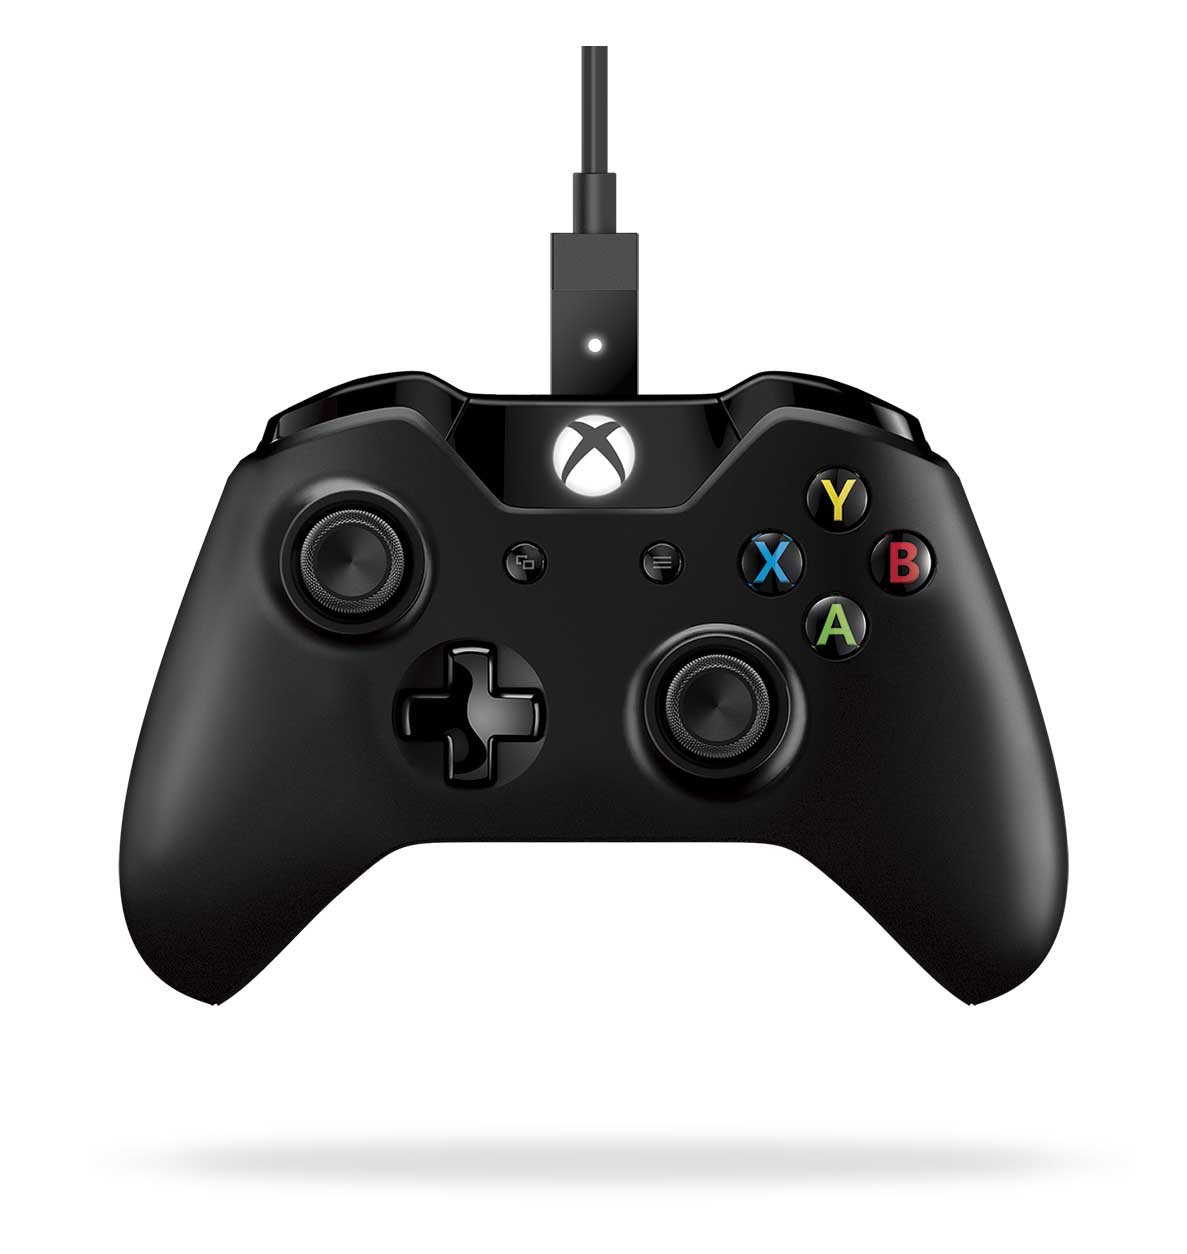 Microsoft Xbox One Controller + Cable for Windows